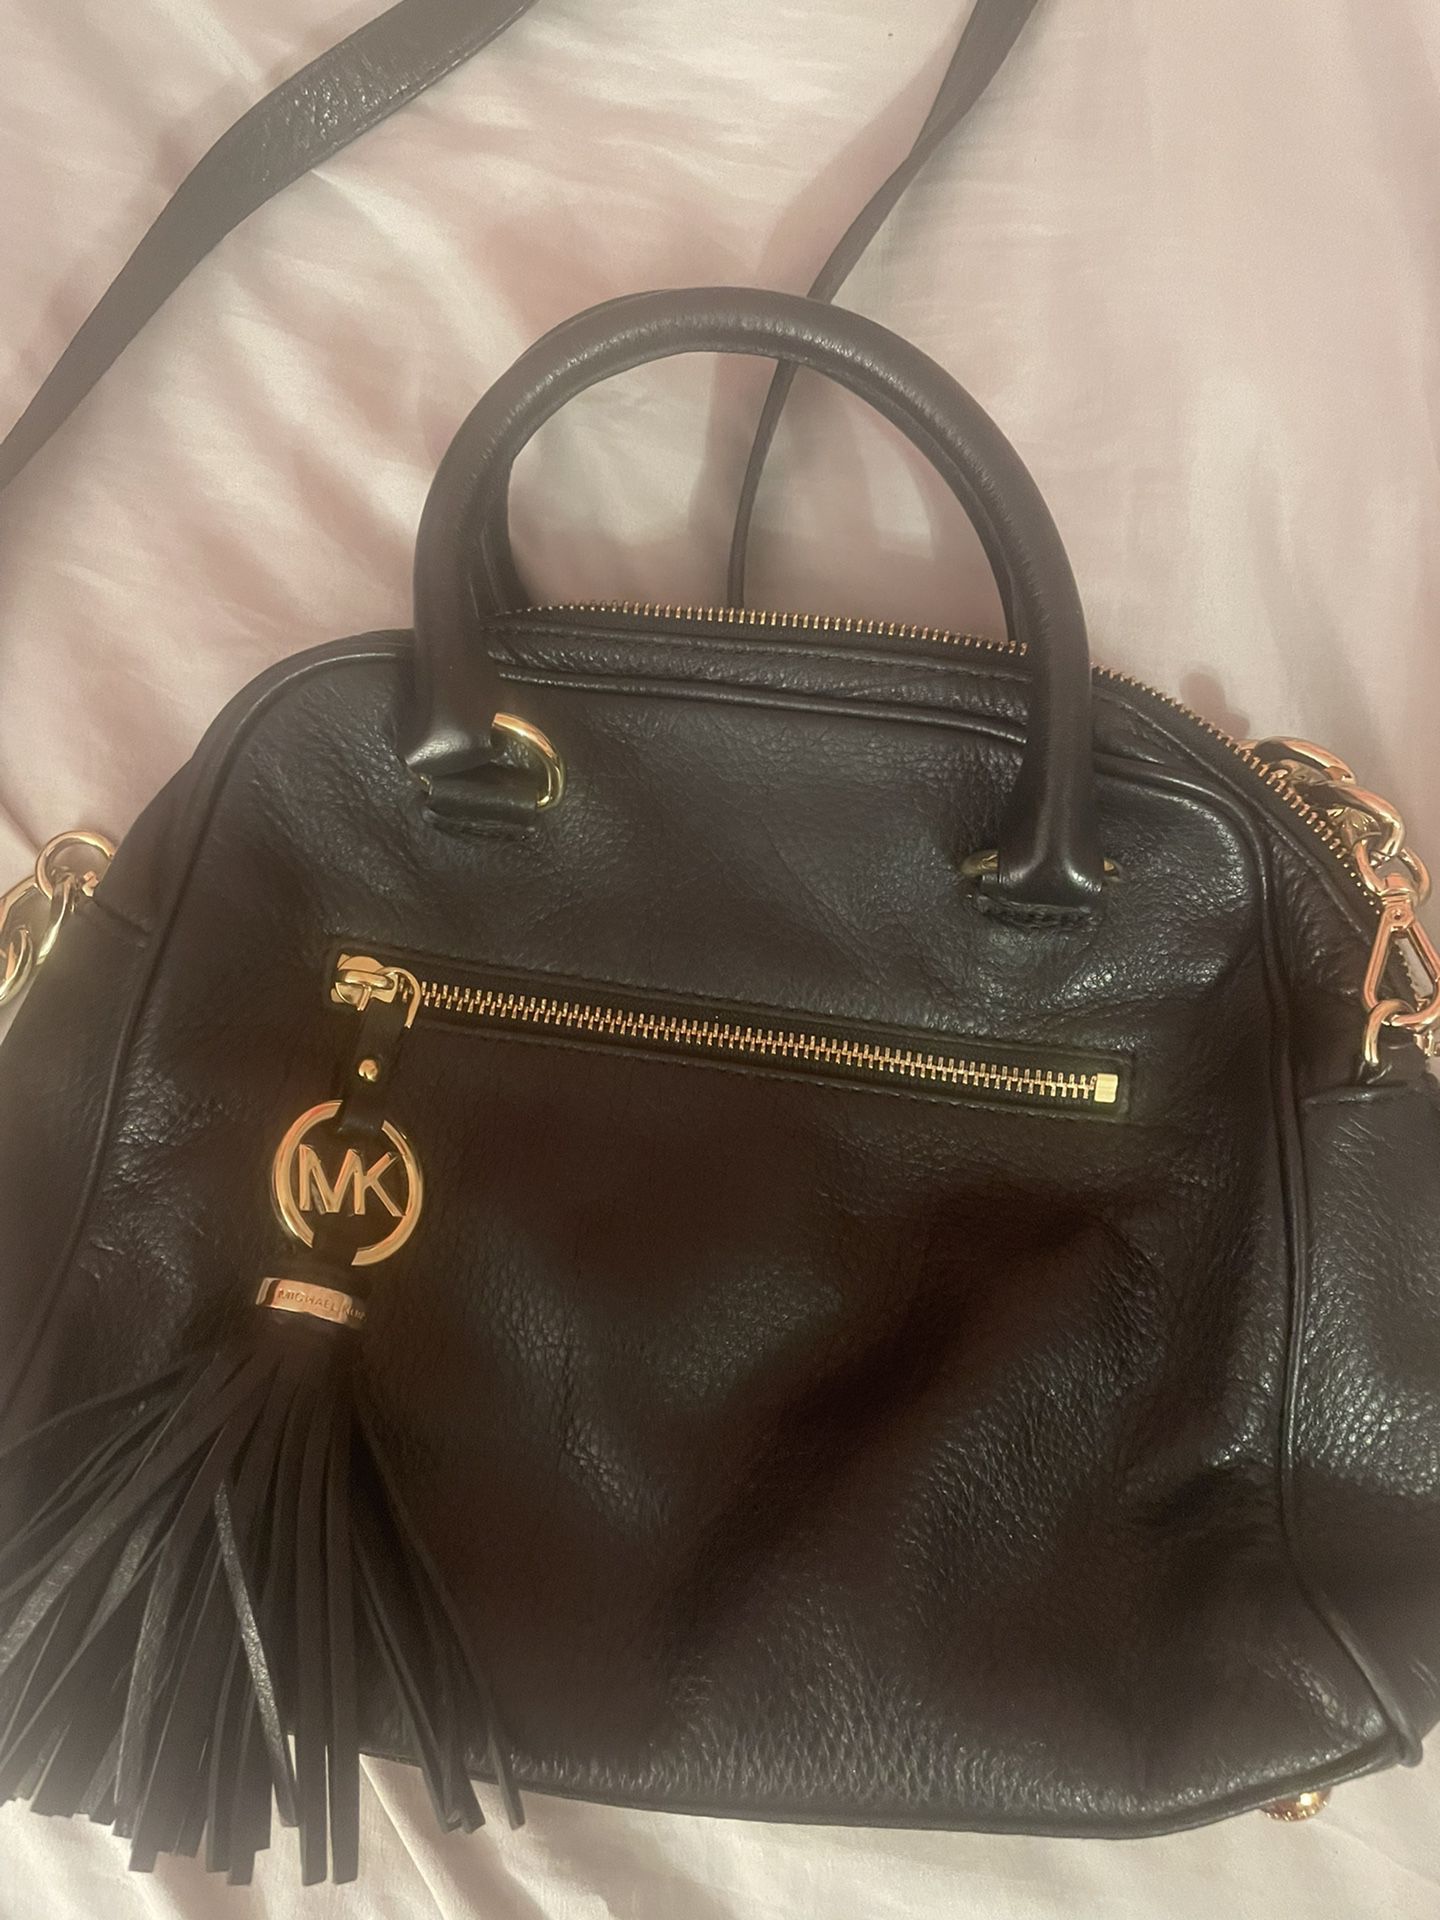 Michaels Kors Black And Gold Chain Purse 